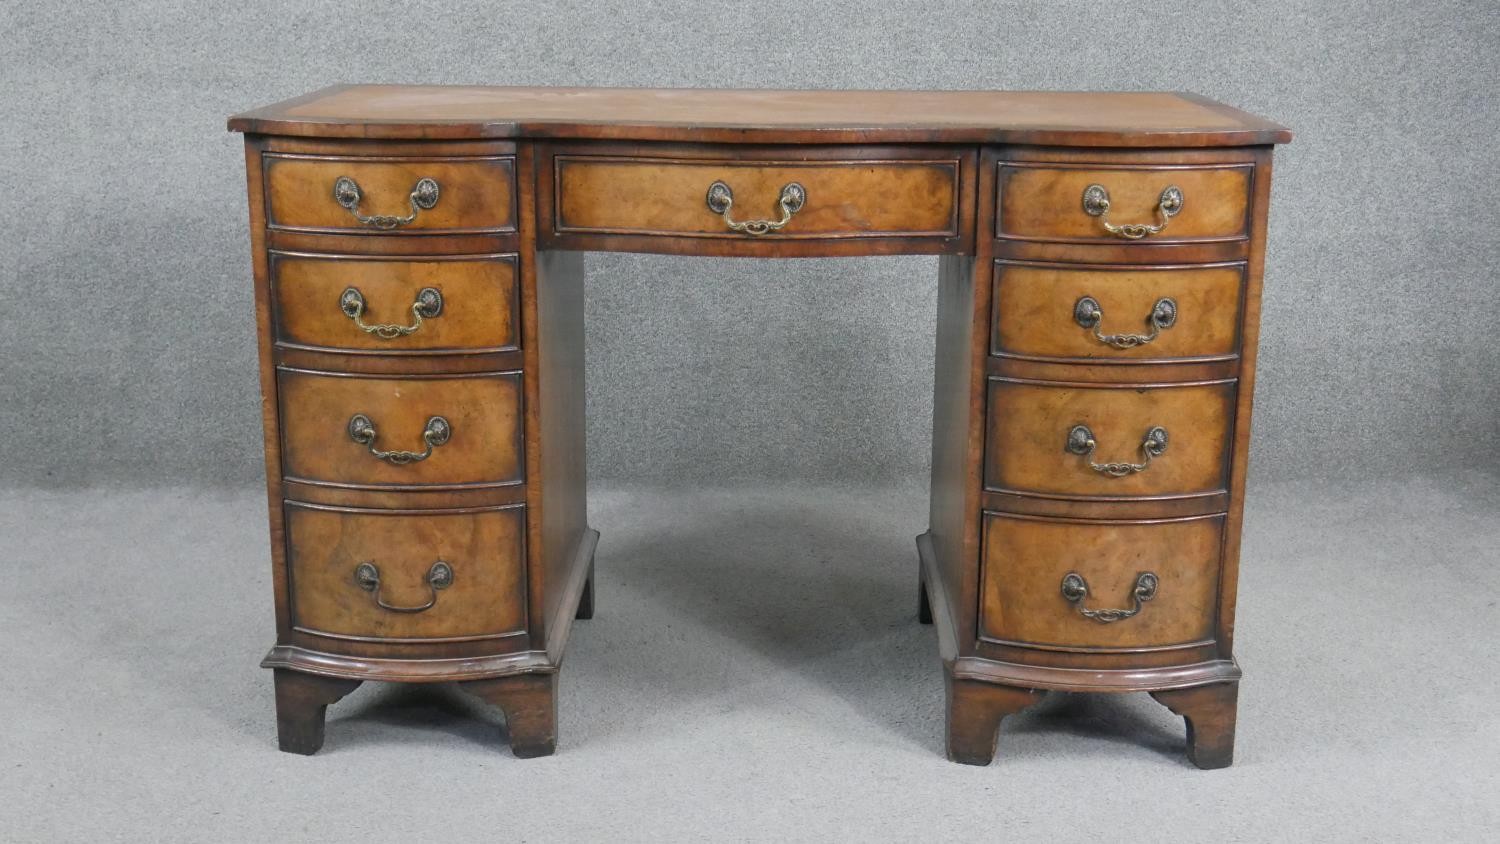 A Reprodux Georgian style figured mahogany pedestal desk with inset leather shaped top on shaped